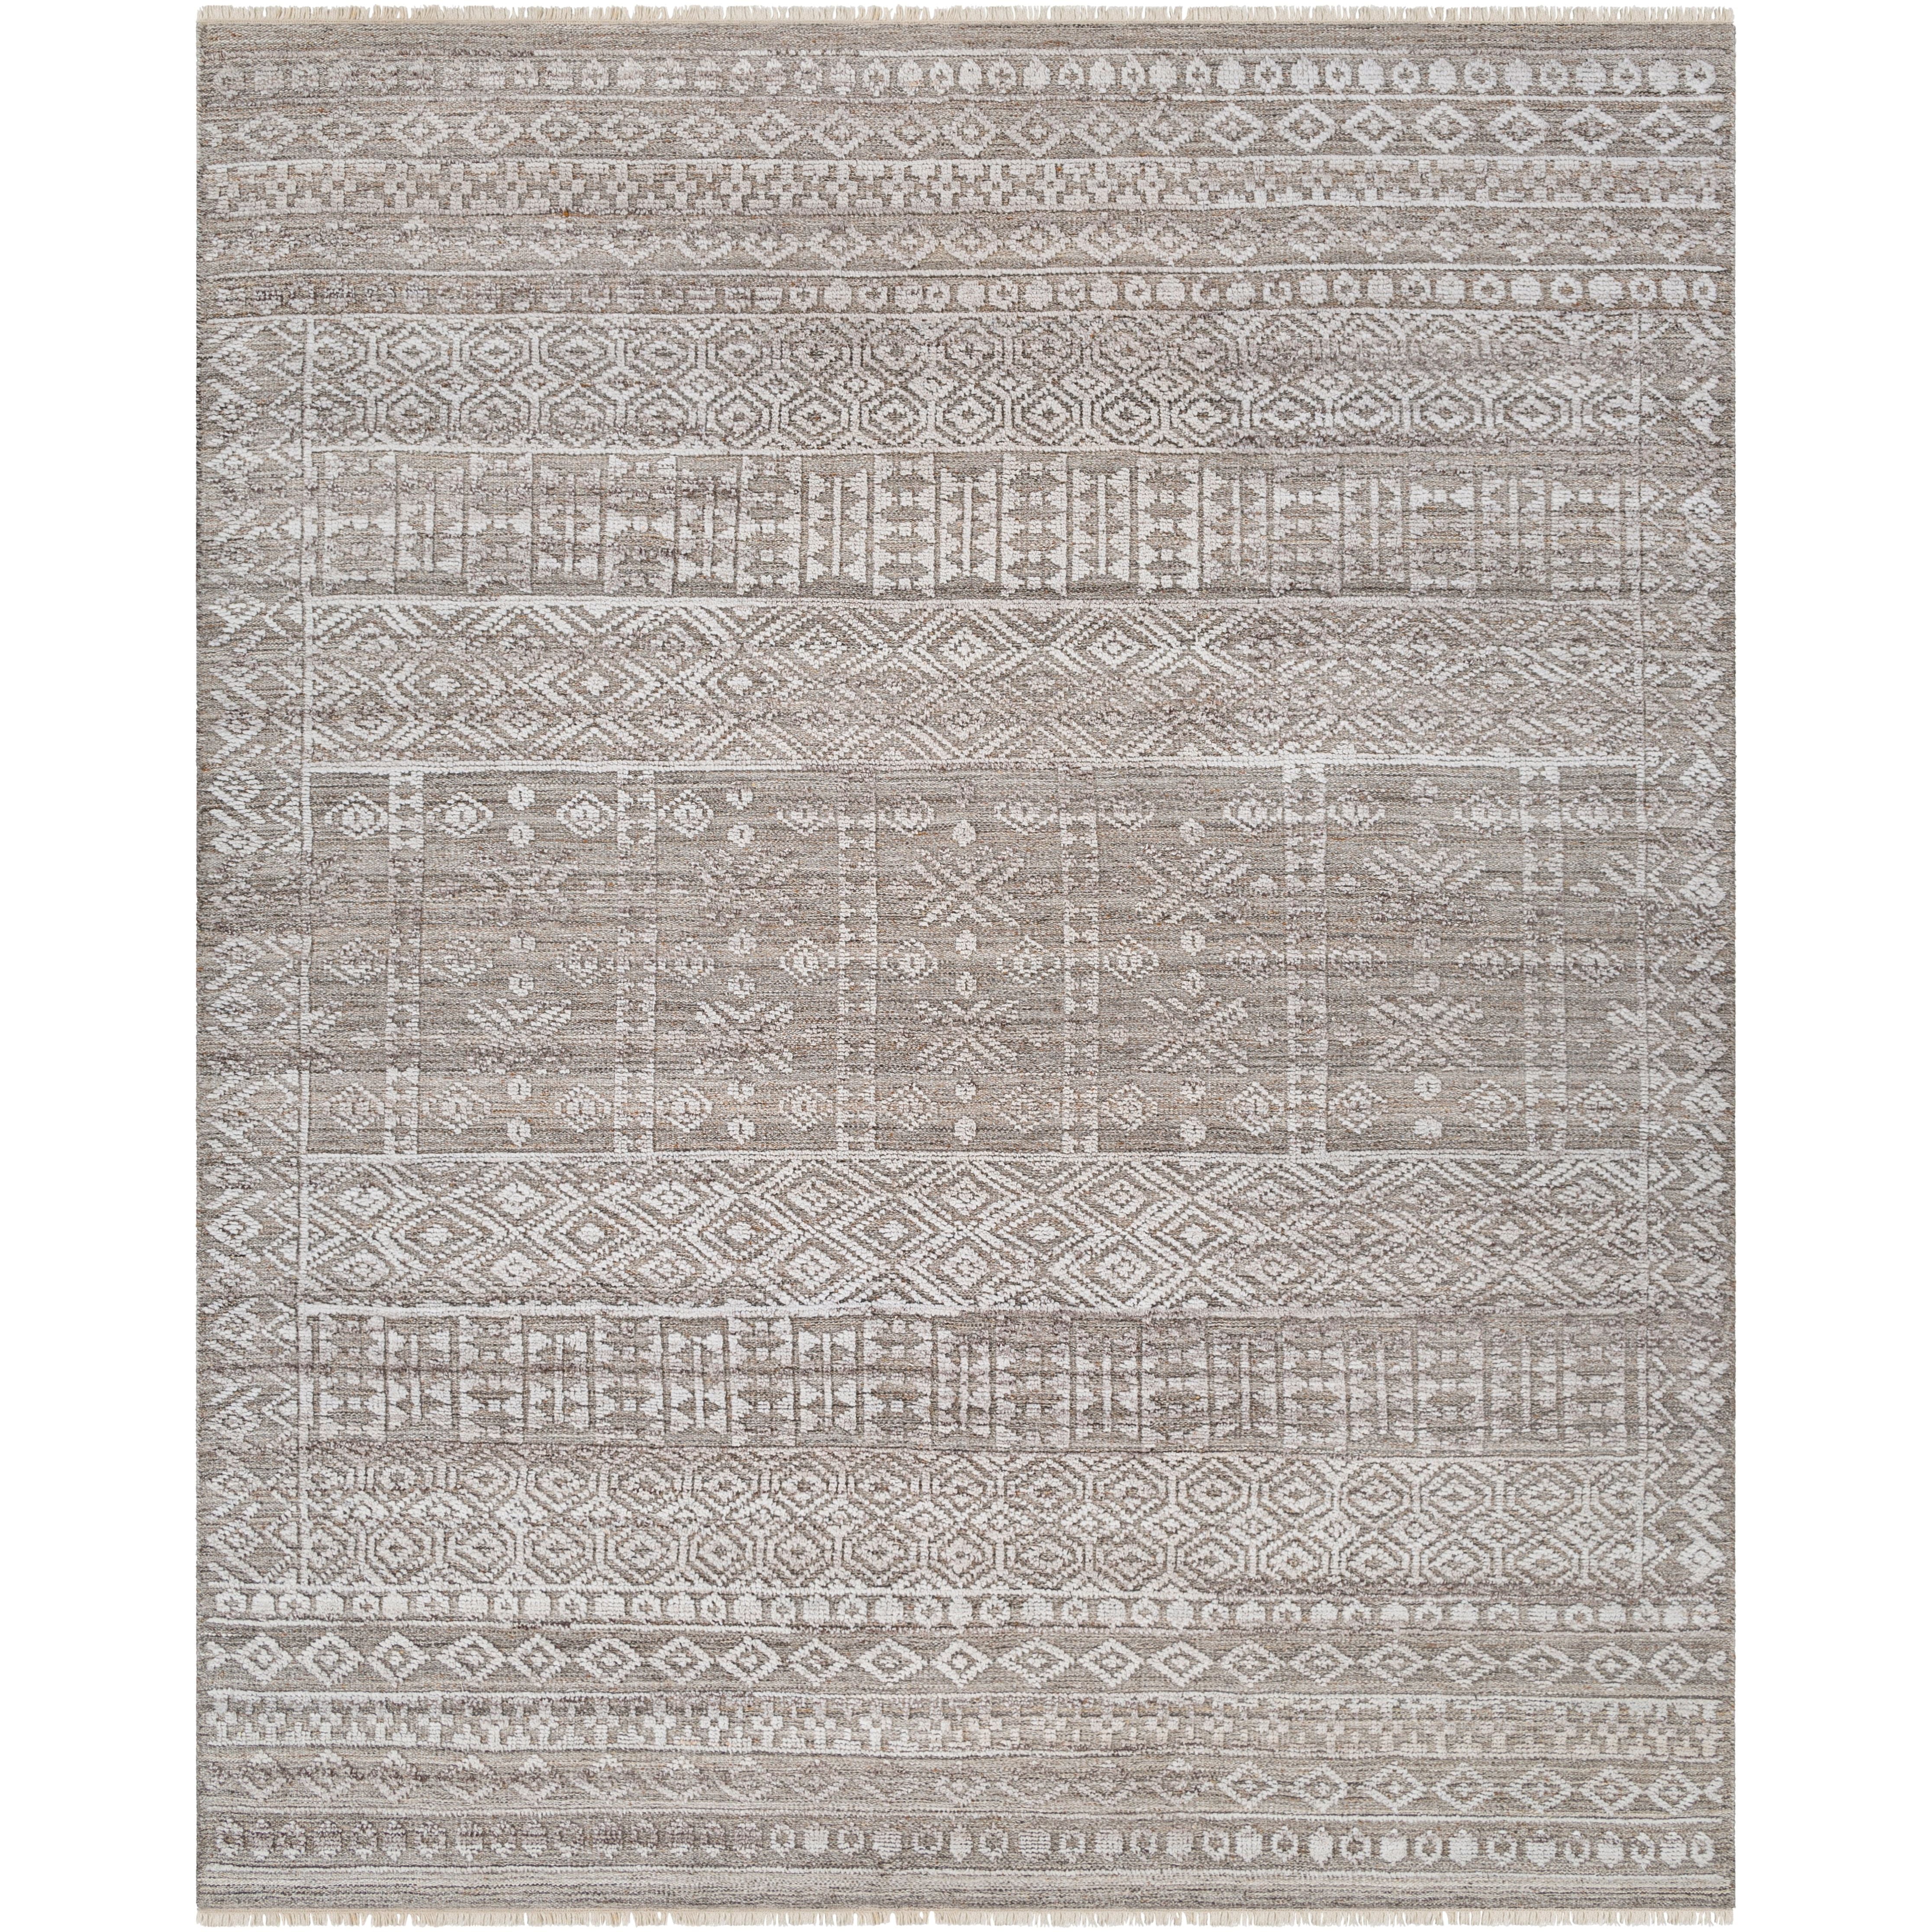 Add a touch of rustic elegance to your home with the Pompei Rust / Silver hand-knotted rug by Surya featuring recycled PET yarn. This rug is indoor and an outdoor rug, is a washable rug, and perfect for a high traffic area. Amethyst Home provides interior design, new construction, custom furniture, and area rugs in the Kansas City metro area.